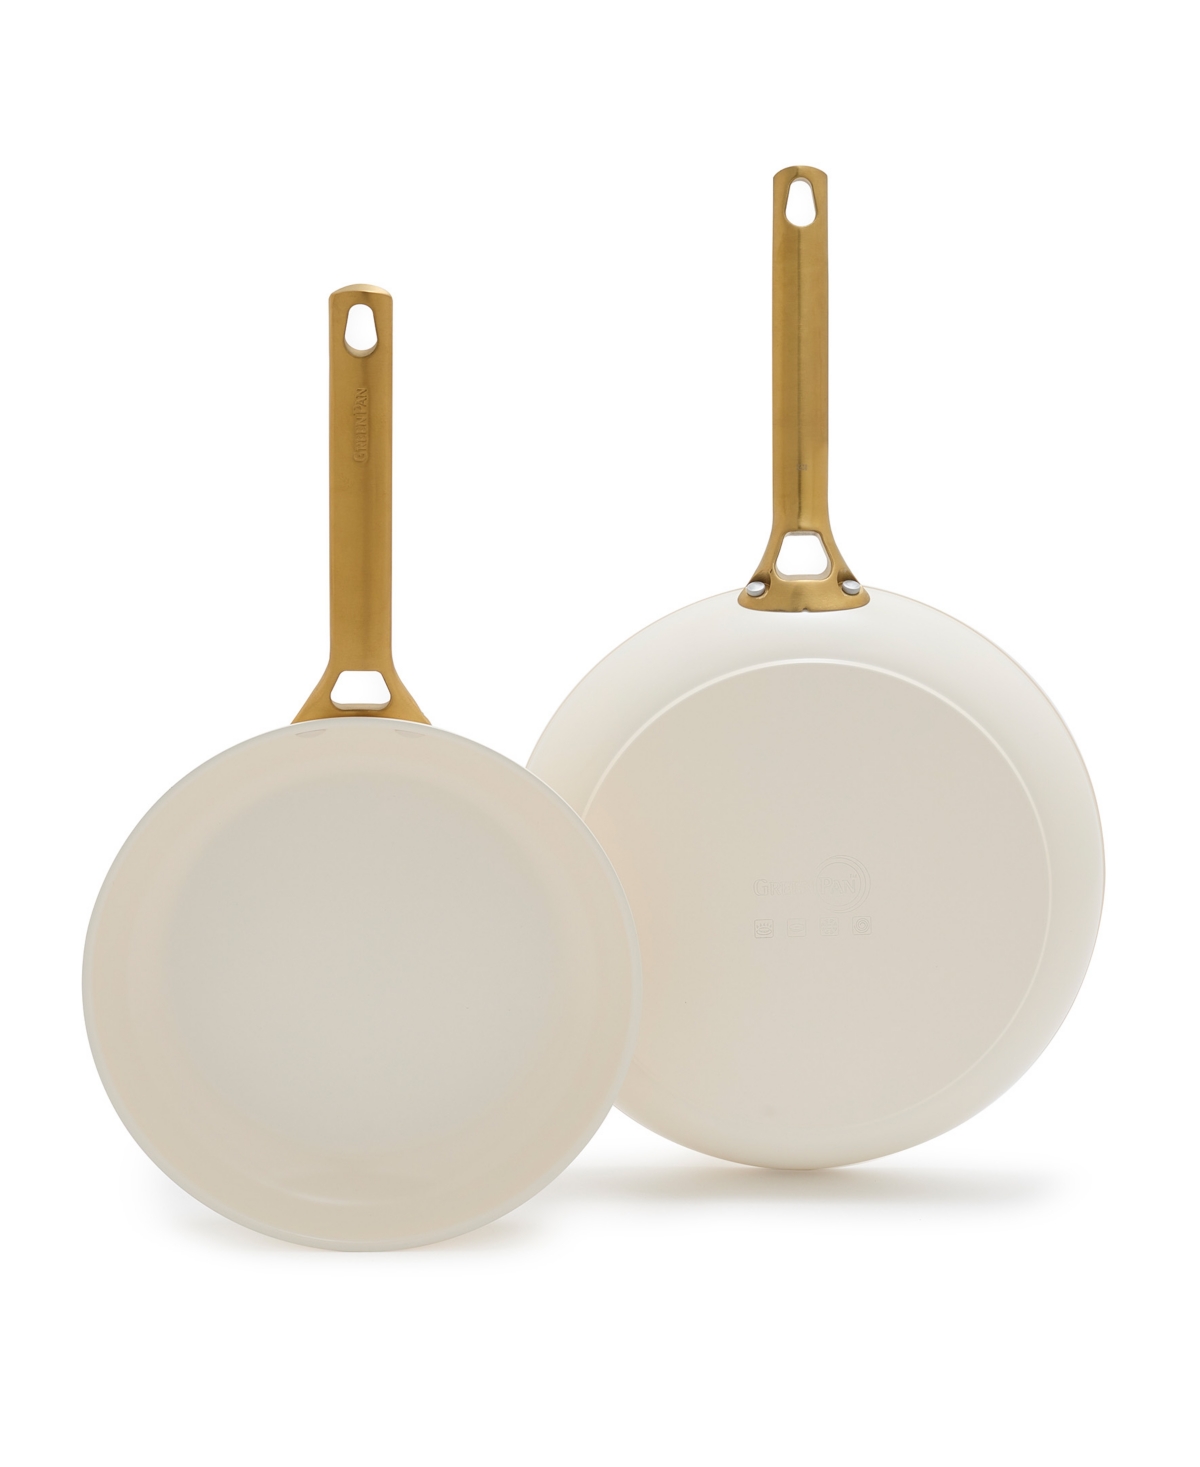 Shop Greenpan Reserve Hard Anodized Aluminum, Stainless Steel 2 Piece Nonstick Frying Pan Set In Cream